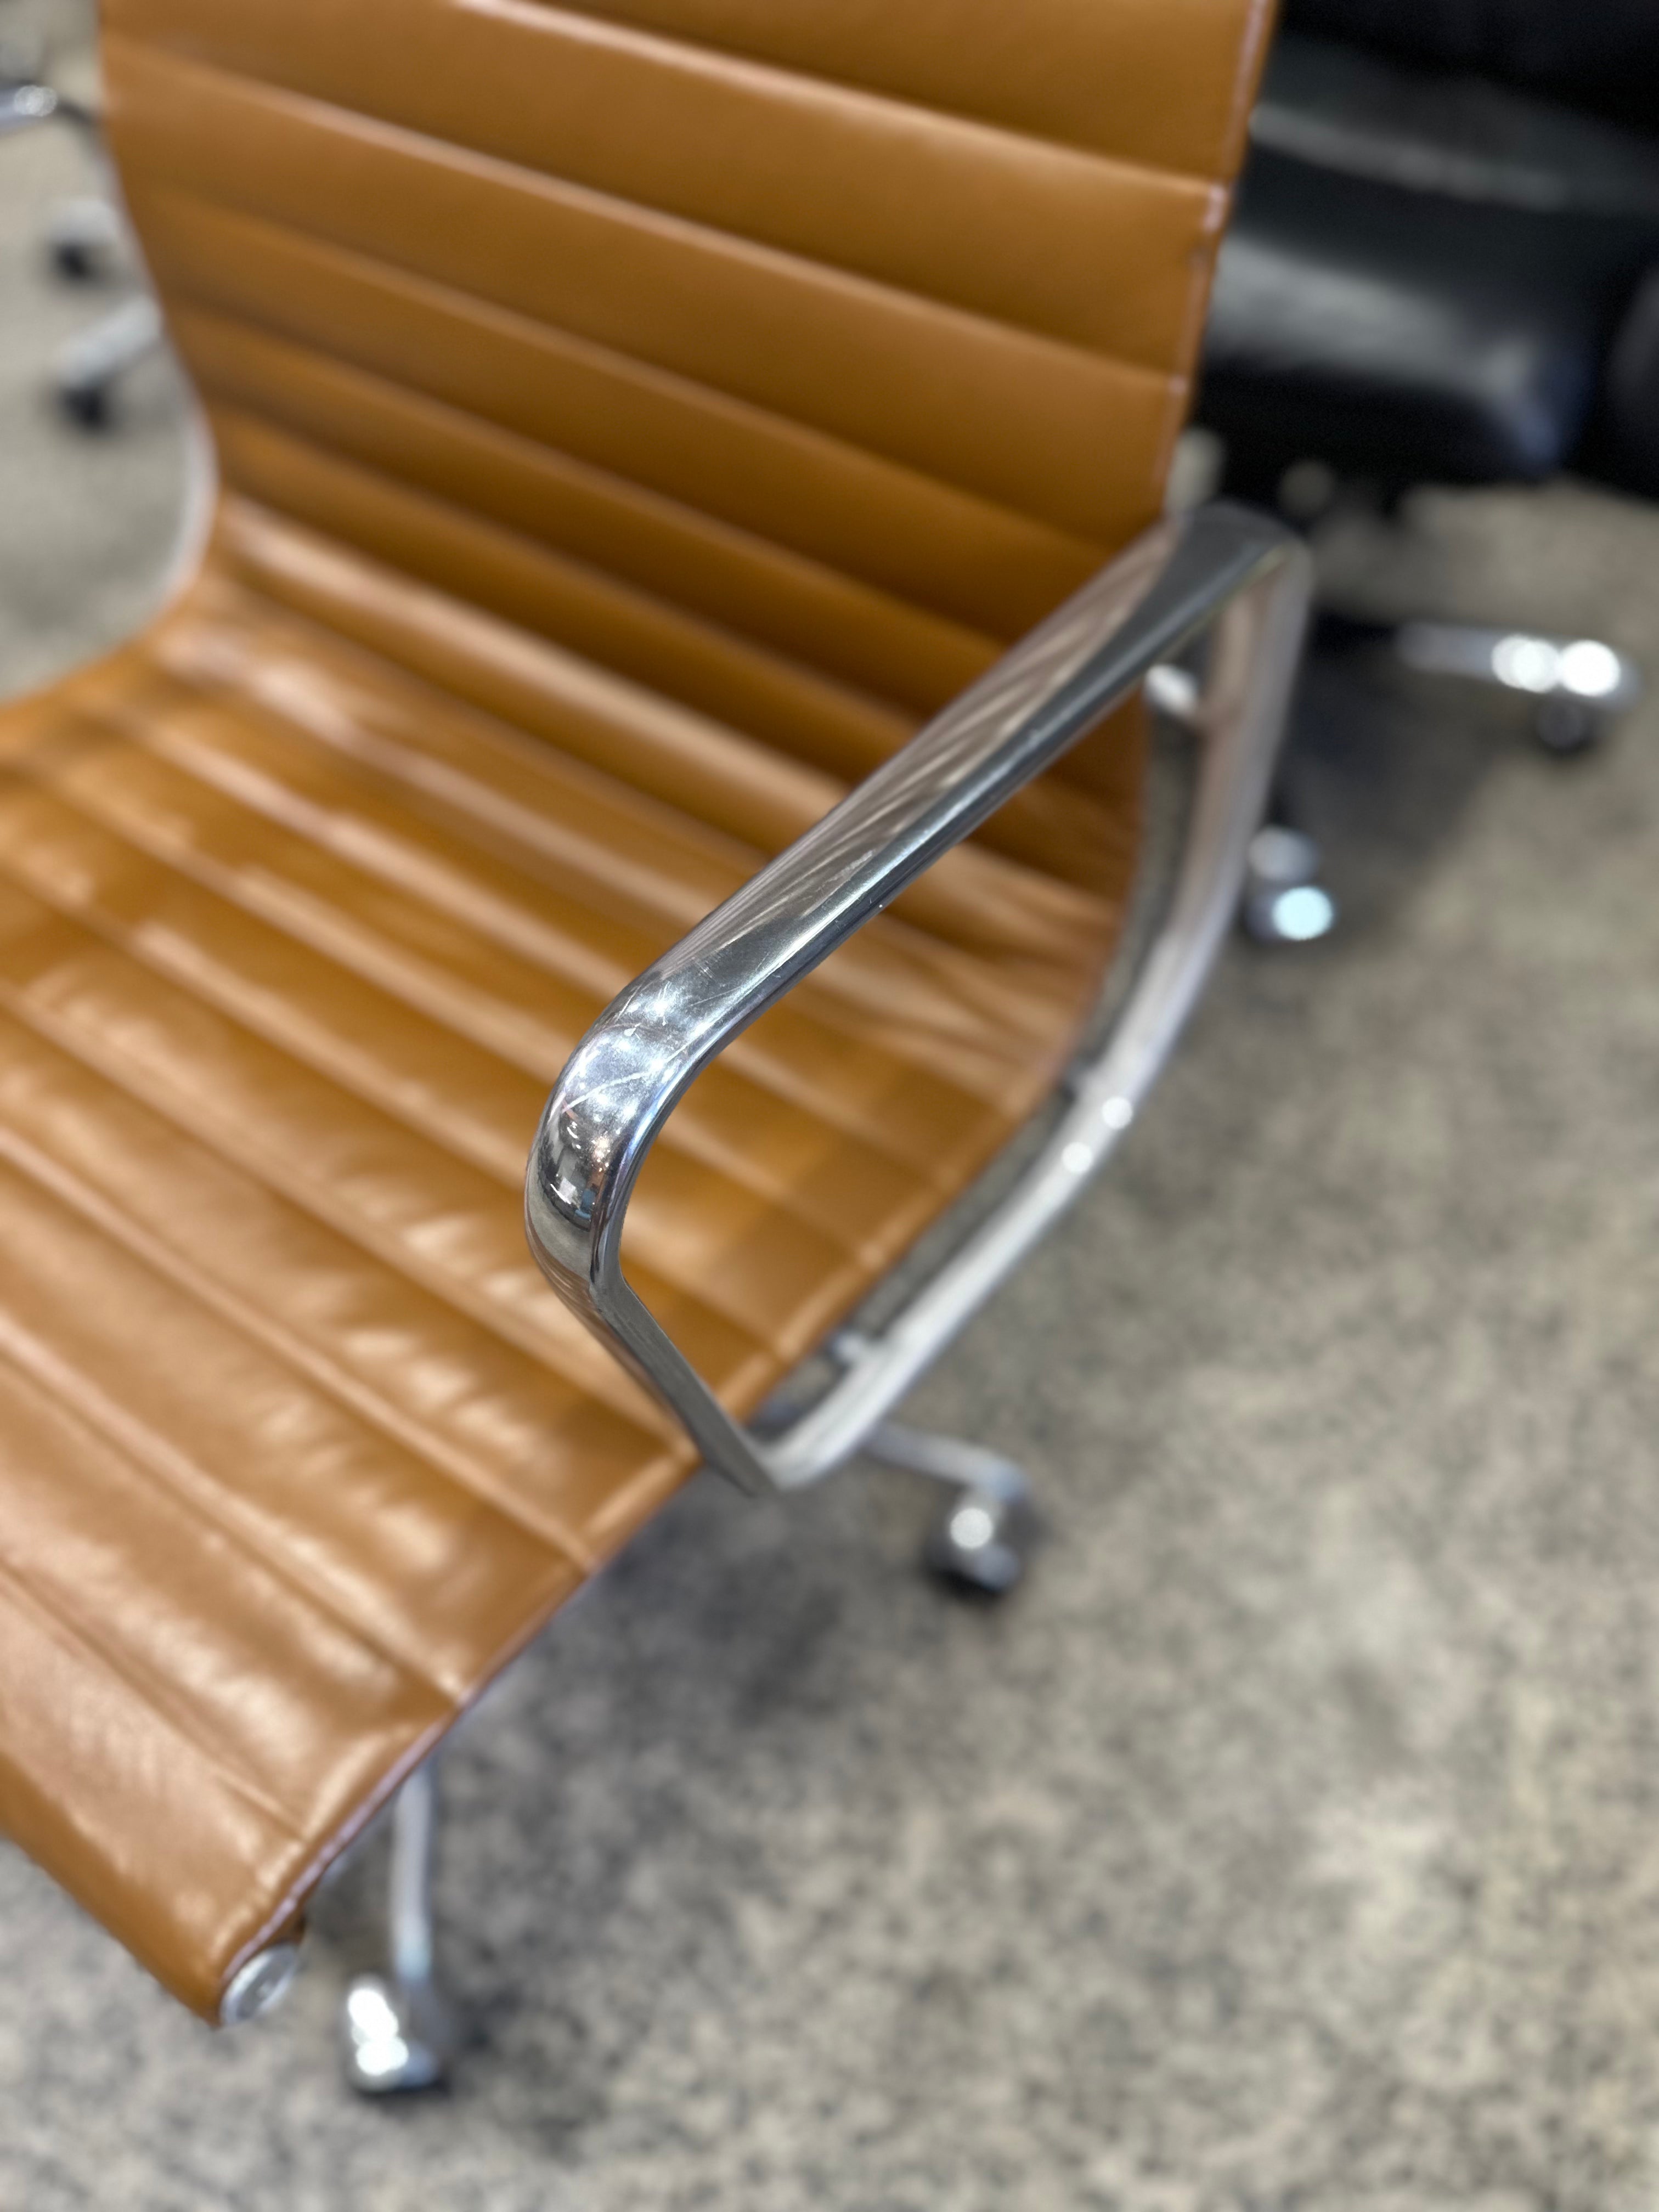 Herman Miller Eames Aluminium Group Management Chair High back Verified Authentic Tan Brown Leather Ray and Charles Eames Chairhub North Melbourne Australia Premium Original Executive Luxury Chairs